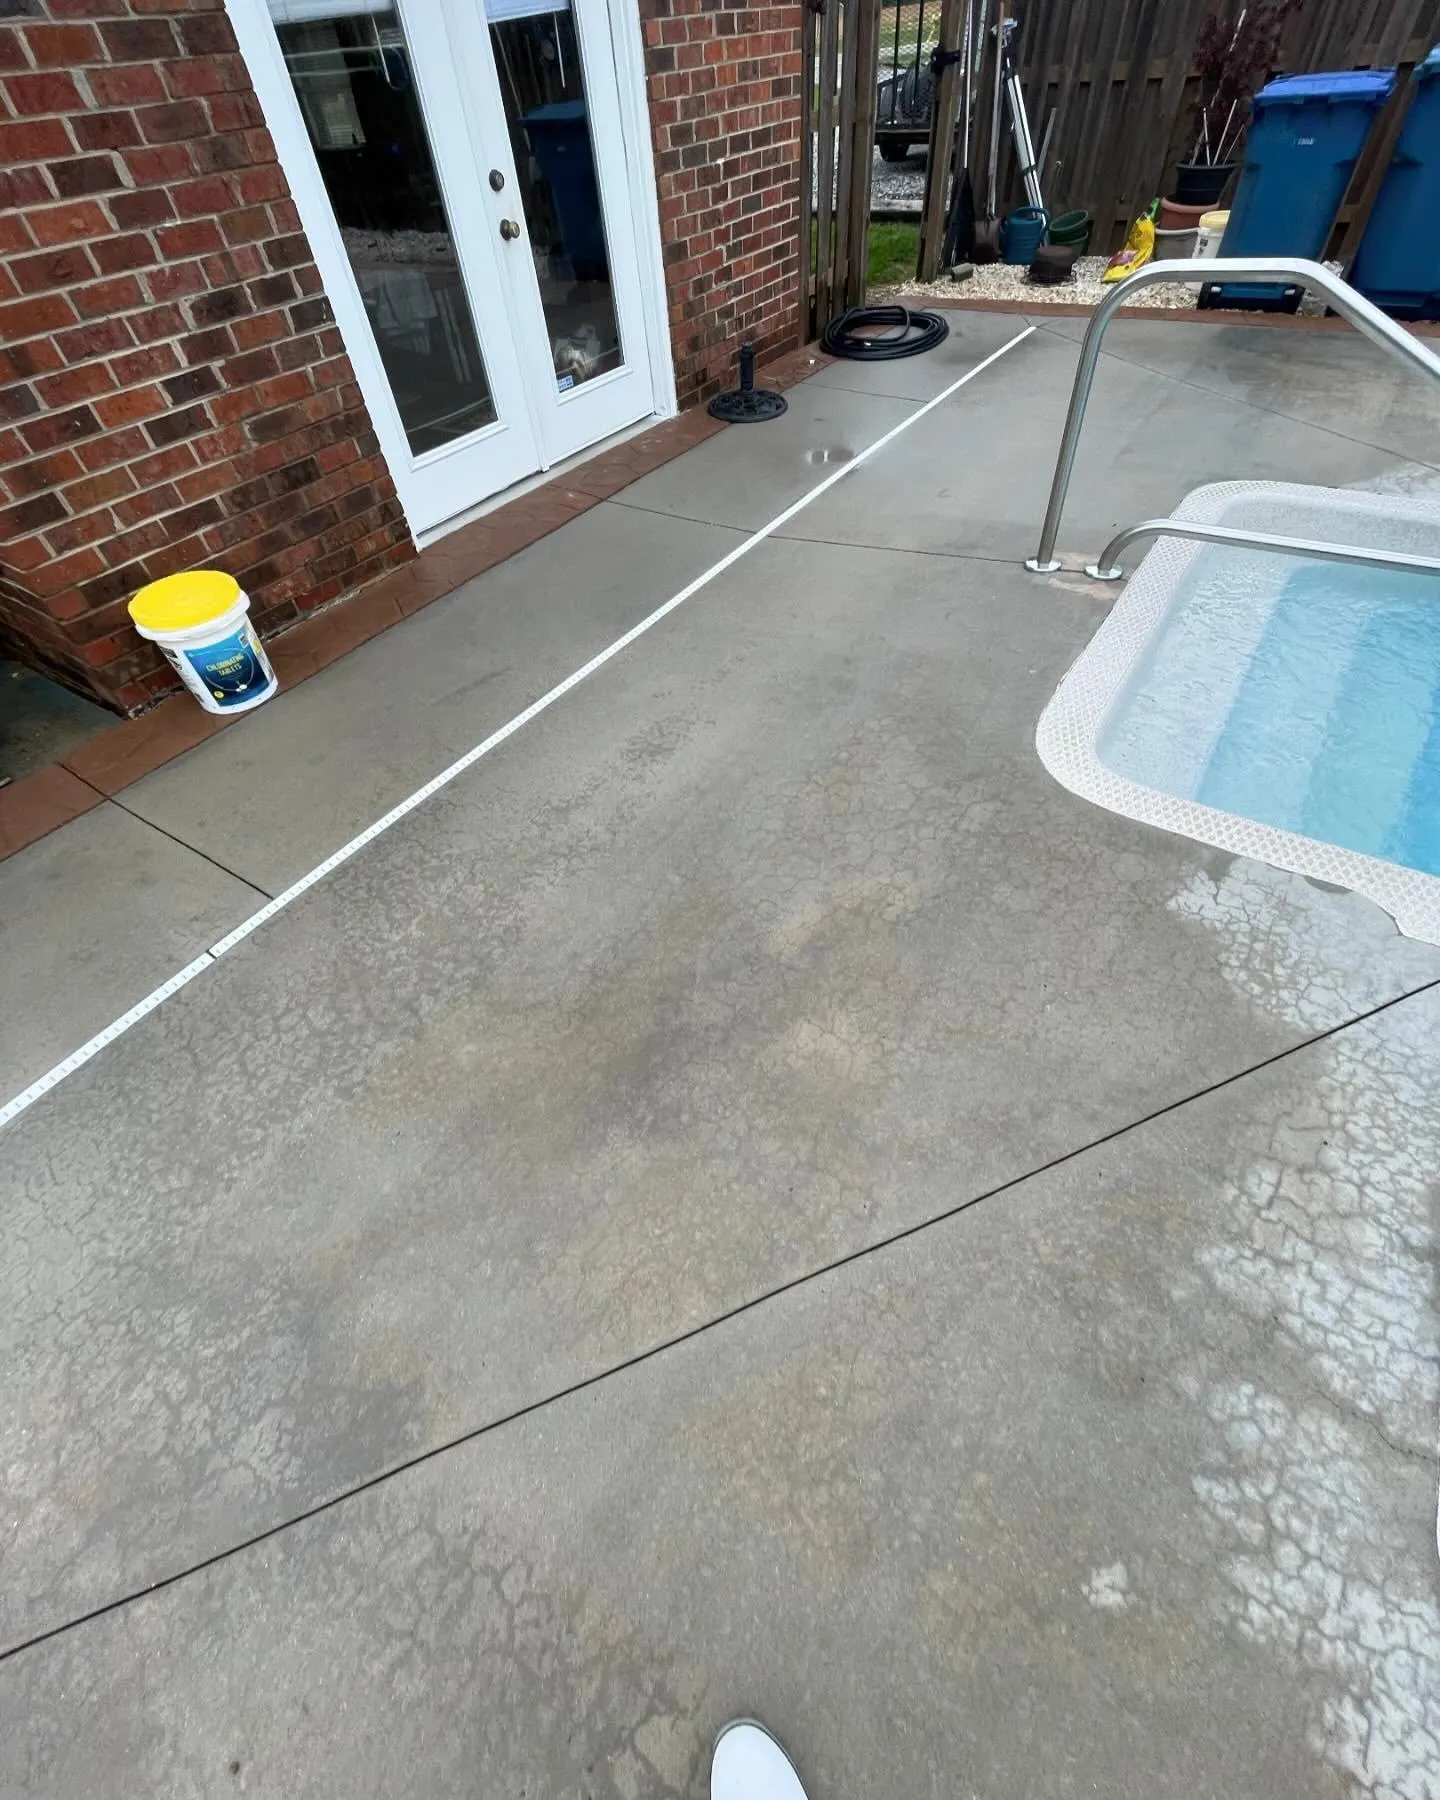 Roof Cleaning for Flemings Pressure Washing LLC in Gibsonville, North Carolina